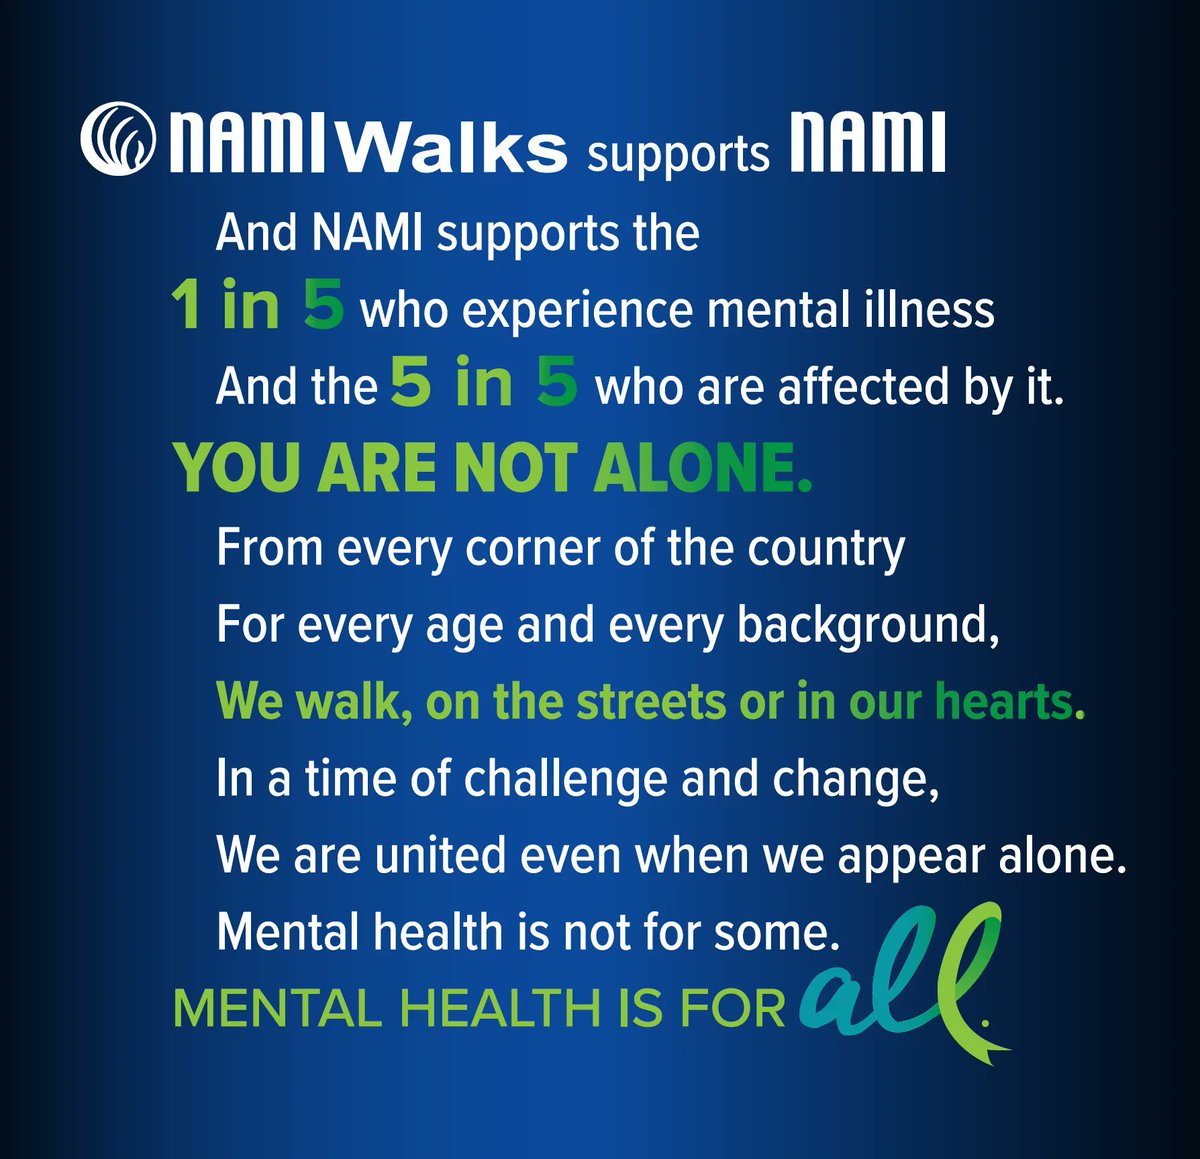 Mental Health is for ALL. You are not alone. Join us at NAMIWalks Central Oregon.
NAMIWalks.org/CentralOregon 
Saturday, May 20, 9-11 AM
American Legion Community Park
850 SW Rimrock Way, Redmond, OR 97756
#NAMIWalks #Together4MH